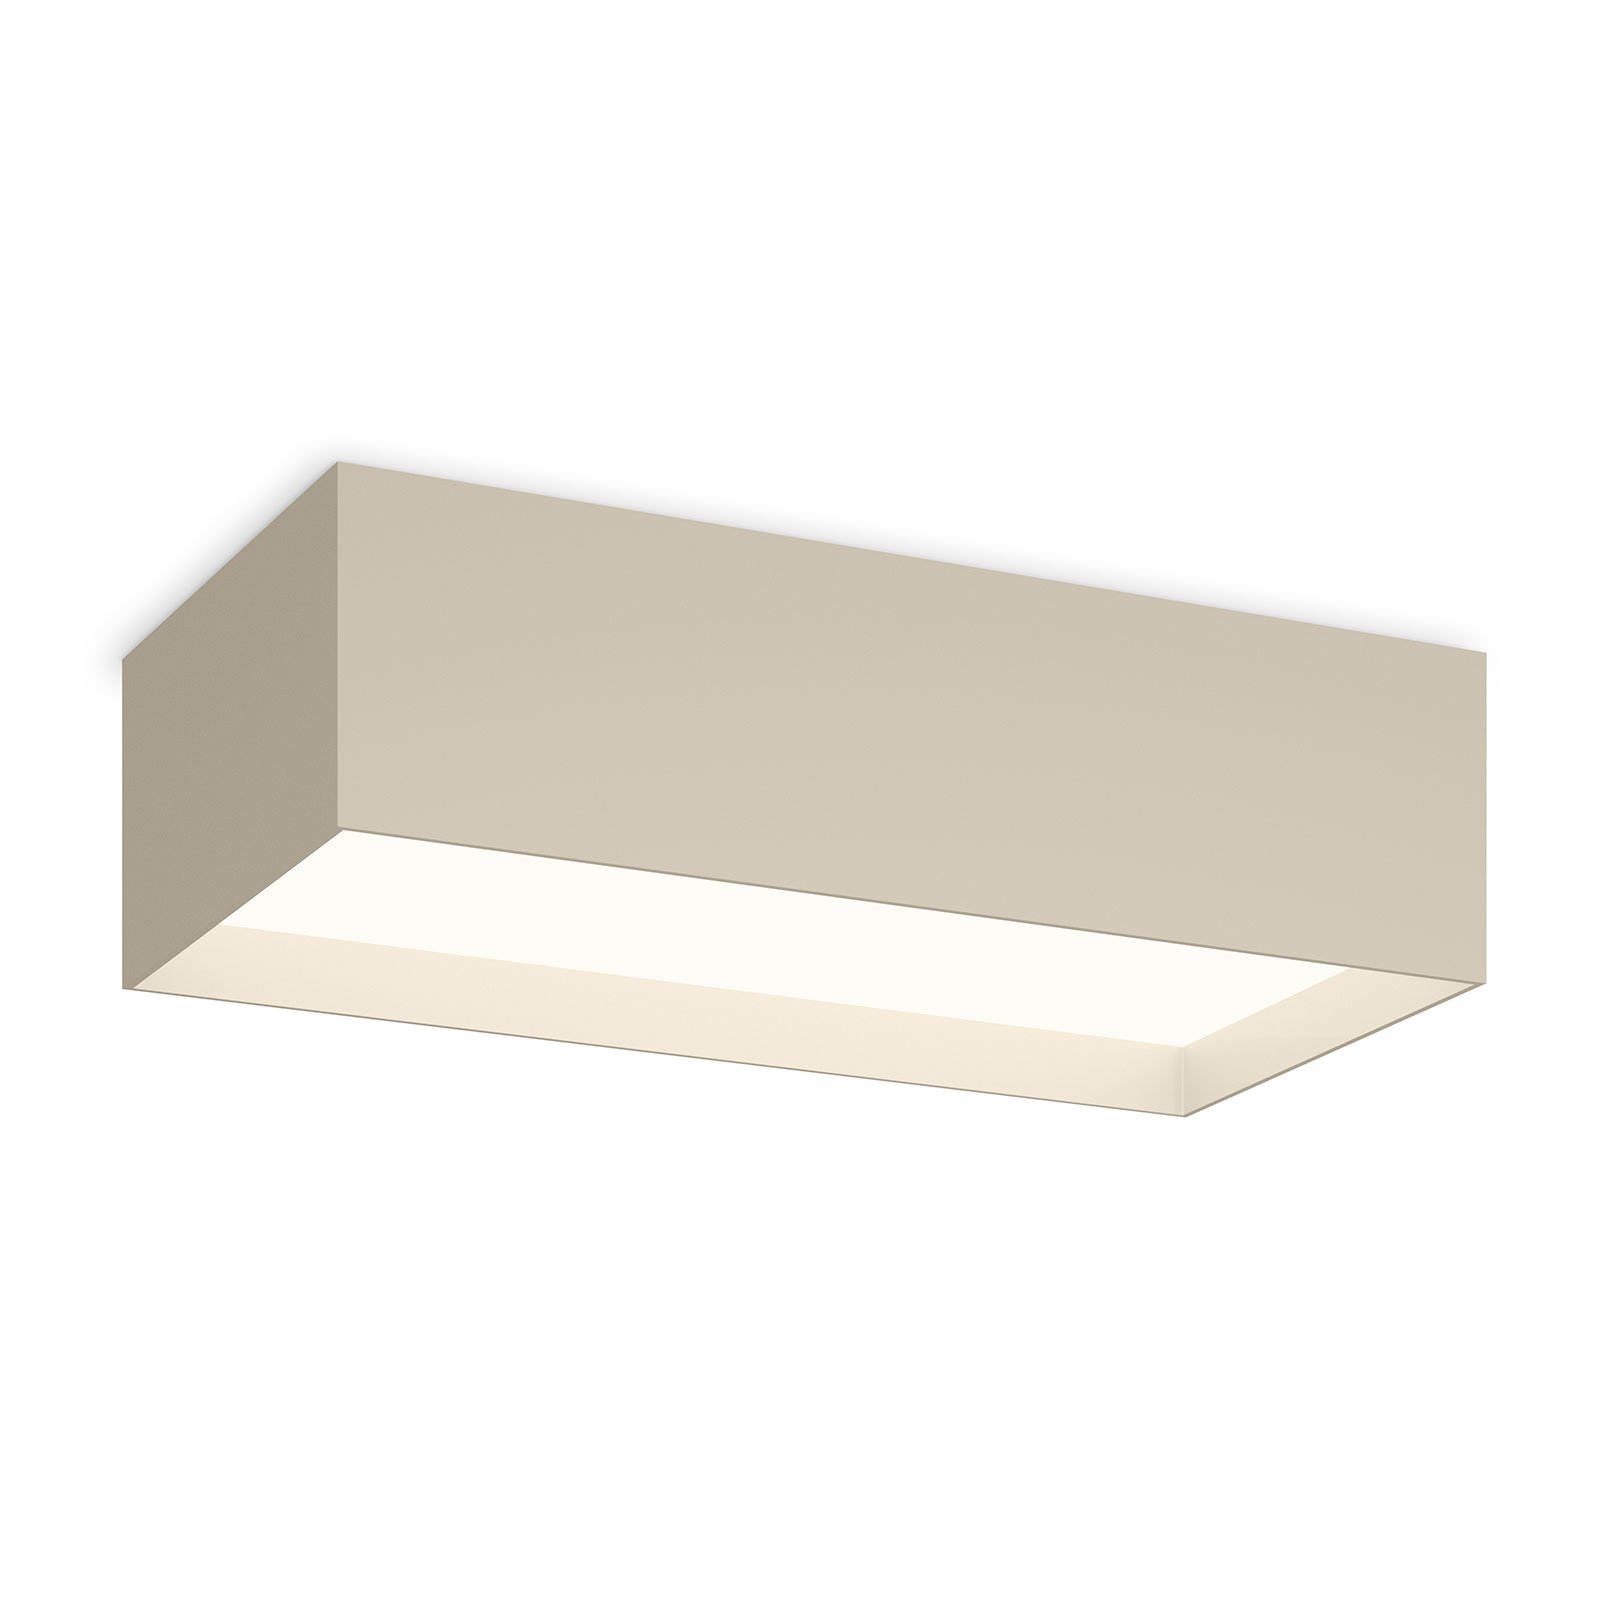 Vibia Structural 2634 ceiling lamp 48cm light grey